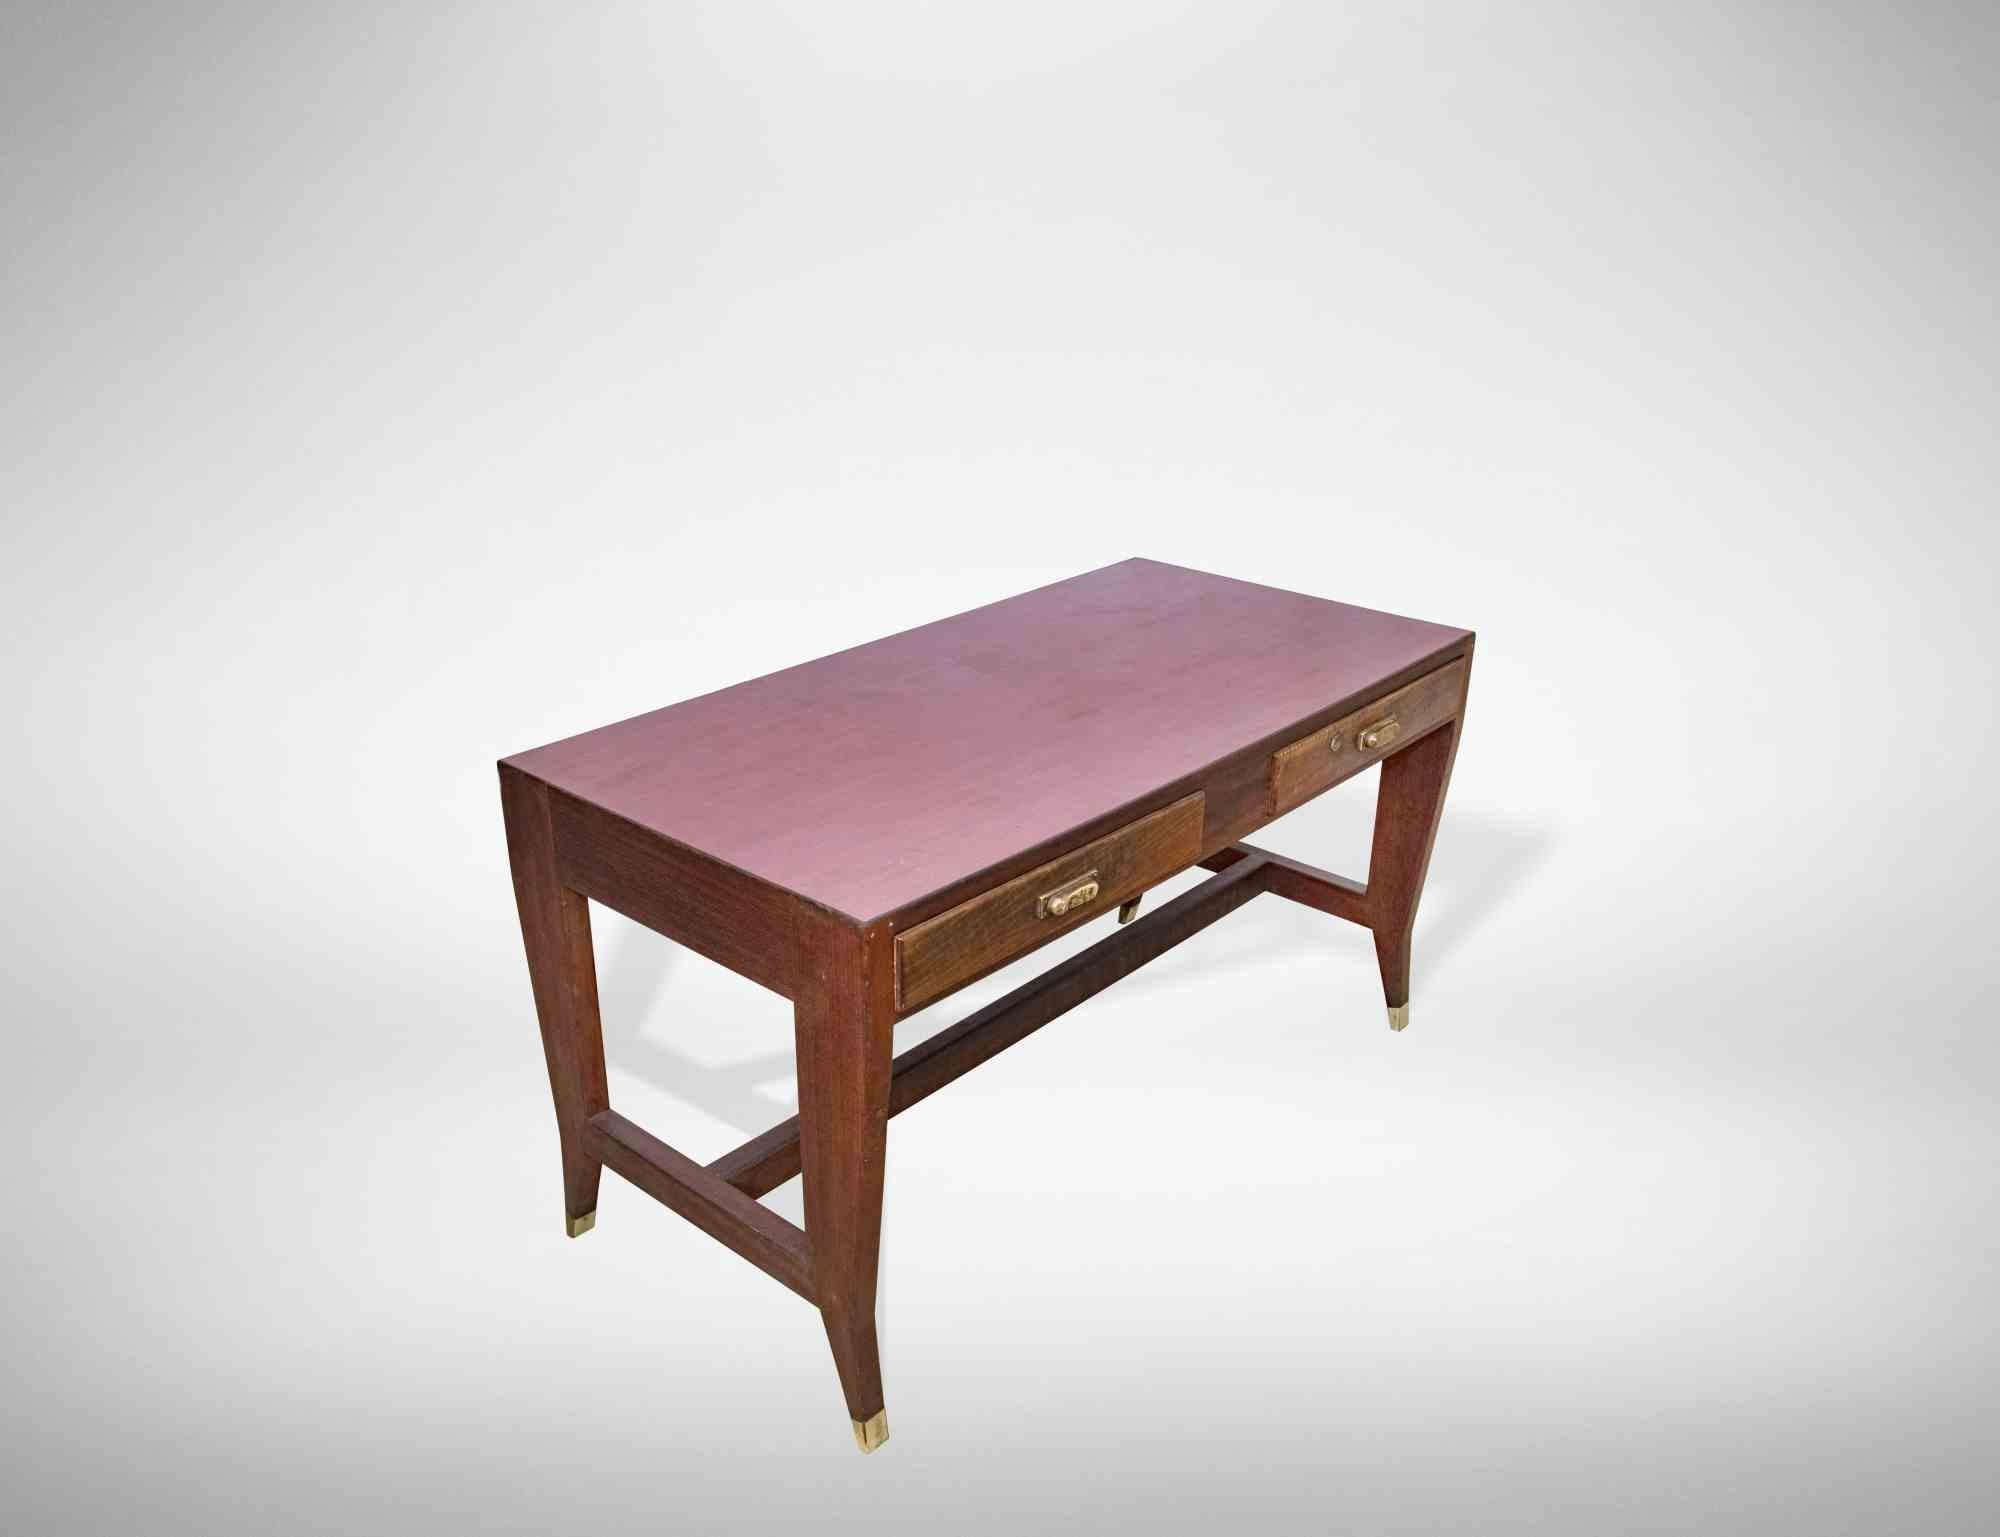 Vintage Writing Desk is an original design item realized in the 1950s by Gio Ponti for Schirolli.

Realized by Gio Ponti and produced by Schirolli for BNL (Banca Nazionale del Lavoro) in the 1950s.

Walnut with formica table and brass